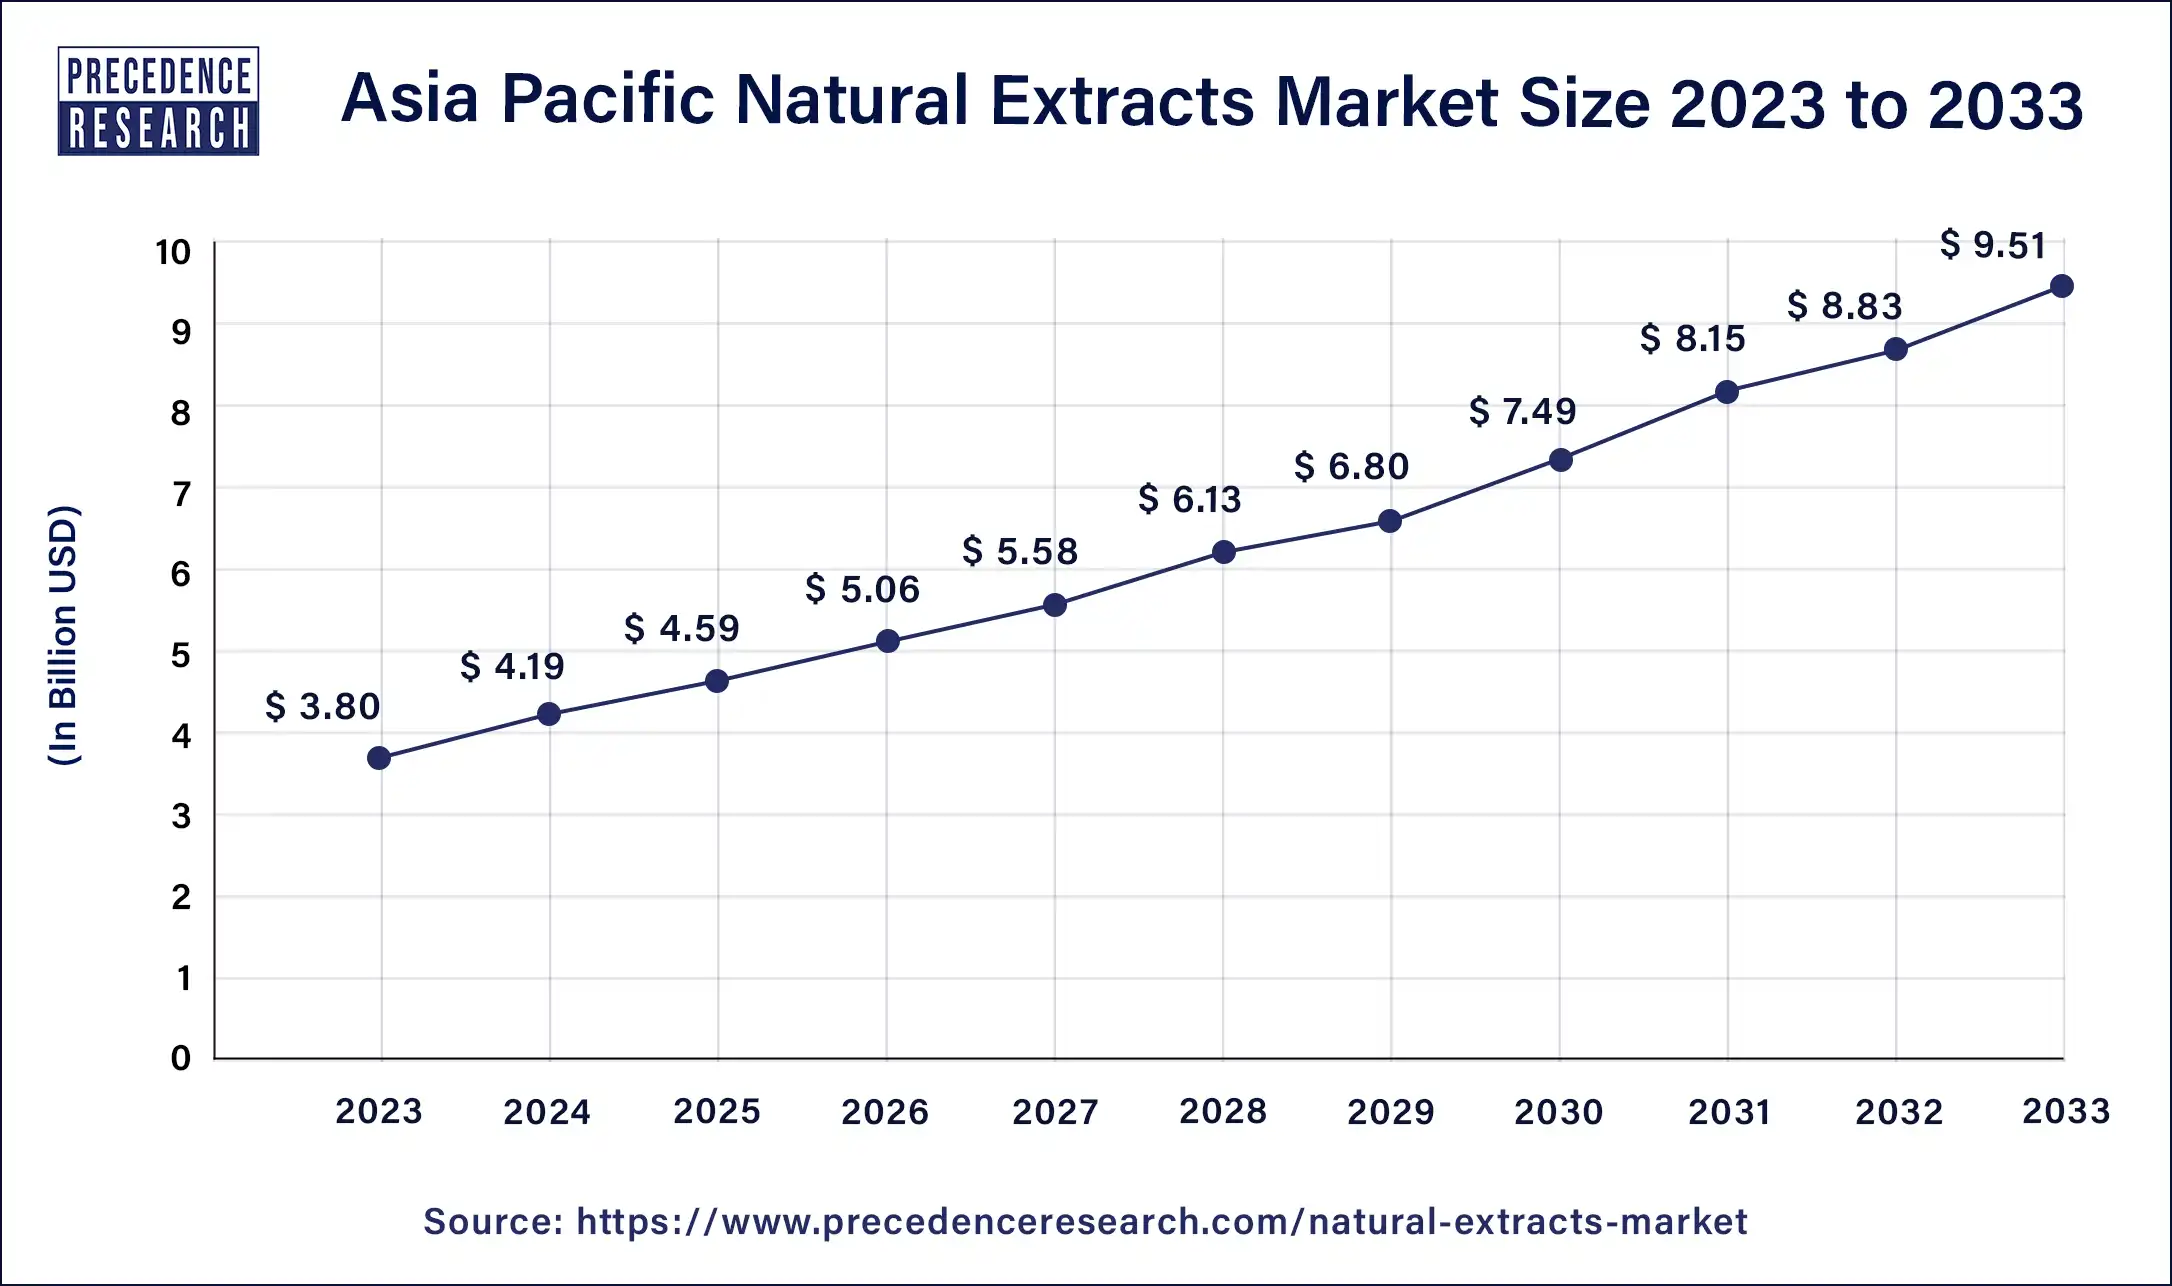 Asia Pacific Natural Extracts Market Size 2024 to 2033